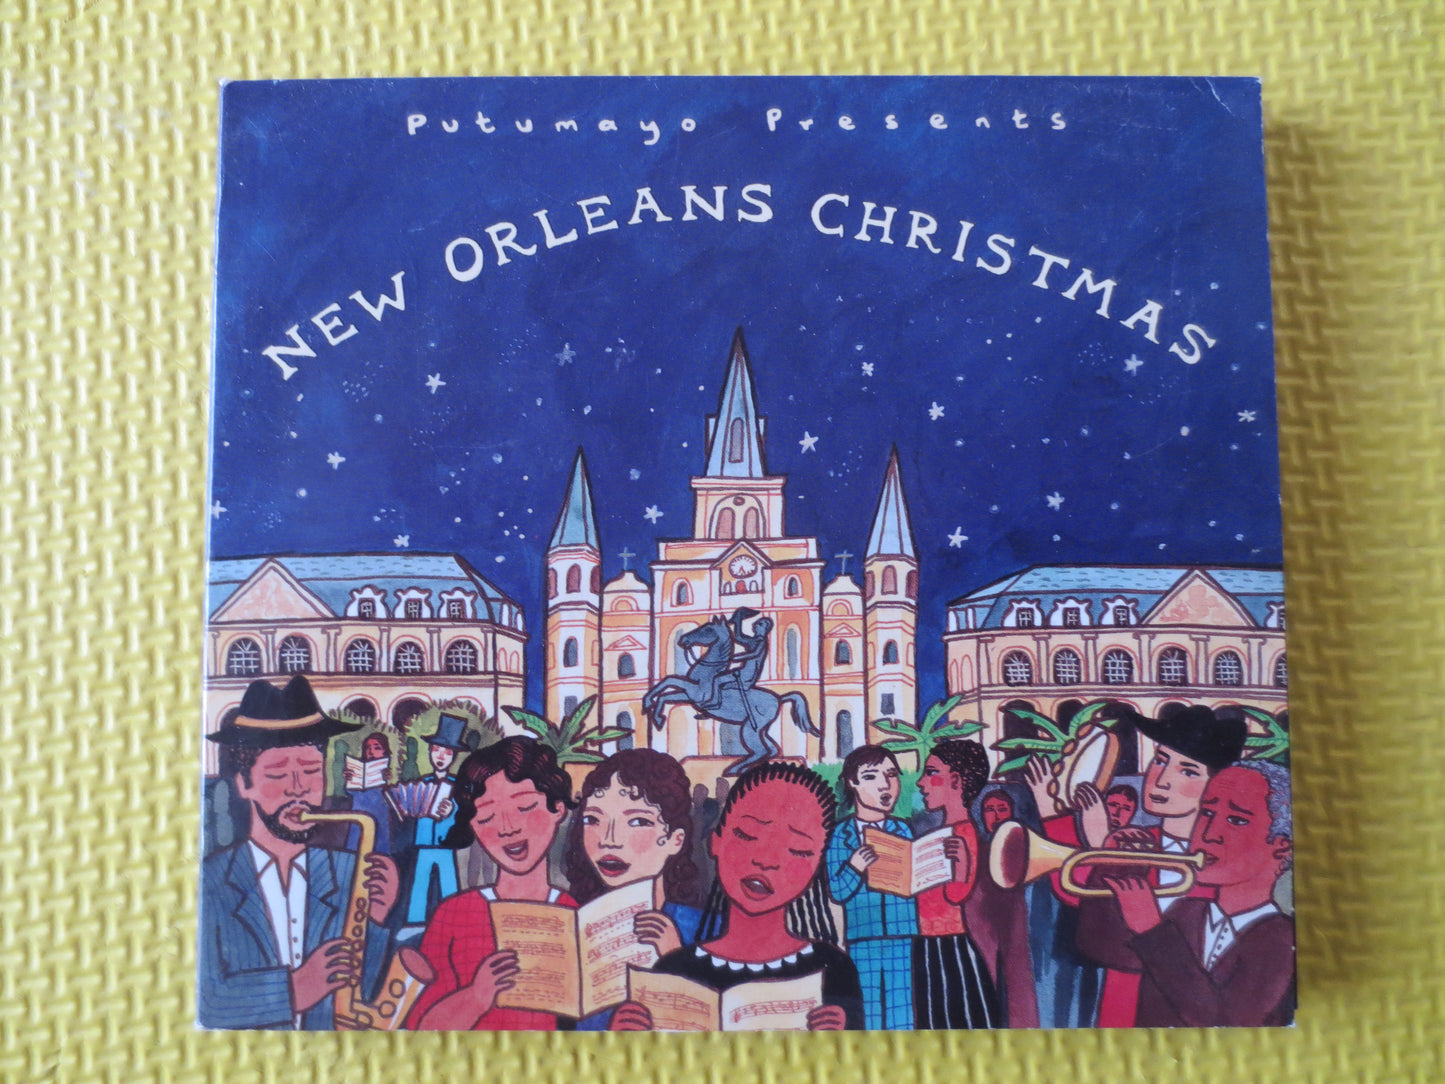 NEW ORLEANS CHRISTMAS, Christmas Music, Christmas Tunes, Christmas Songs, Christmas Hymns, Music Cds, cds, Compact Discs